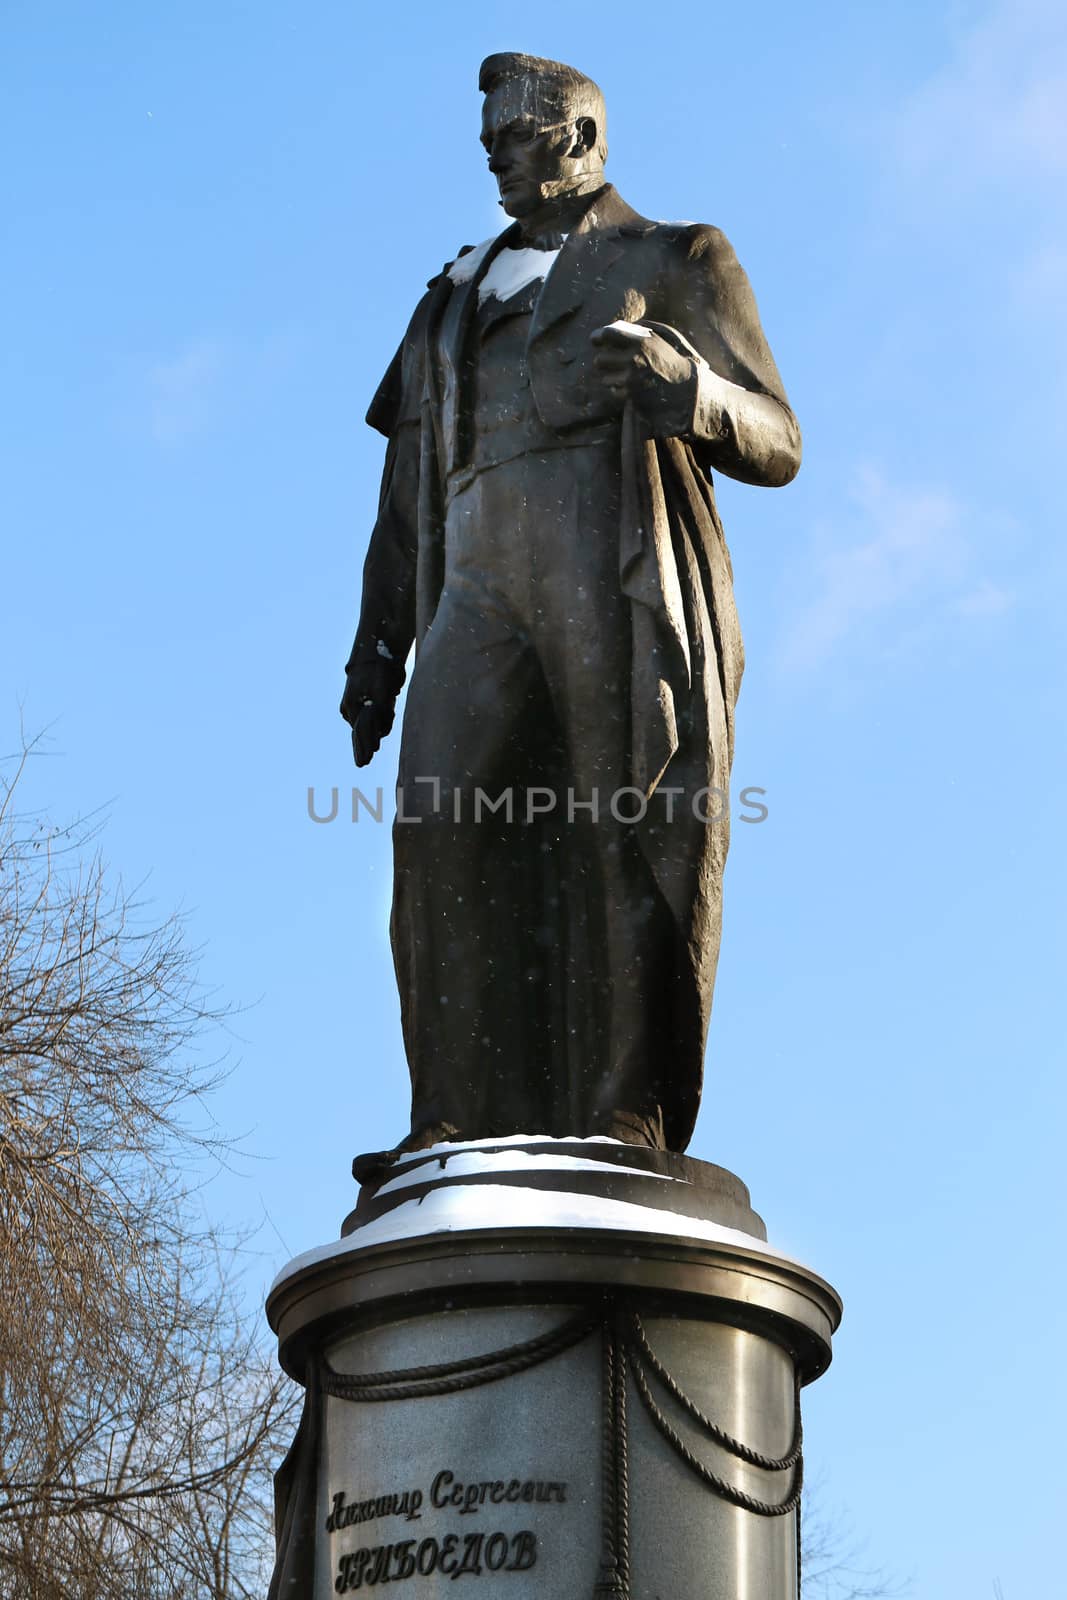 Monument to Alexander Griboyedov Moscow